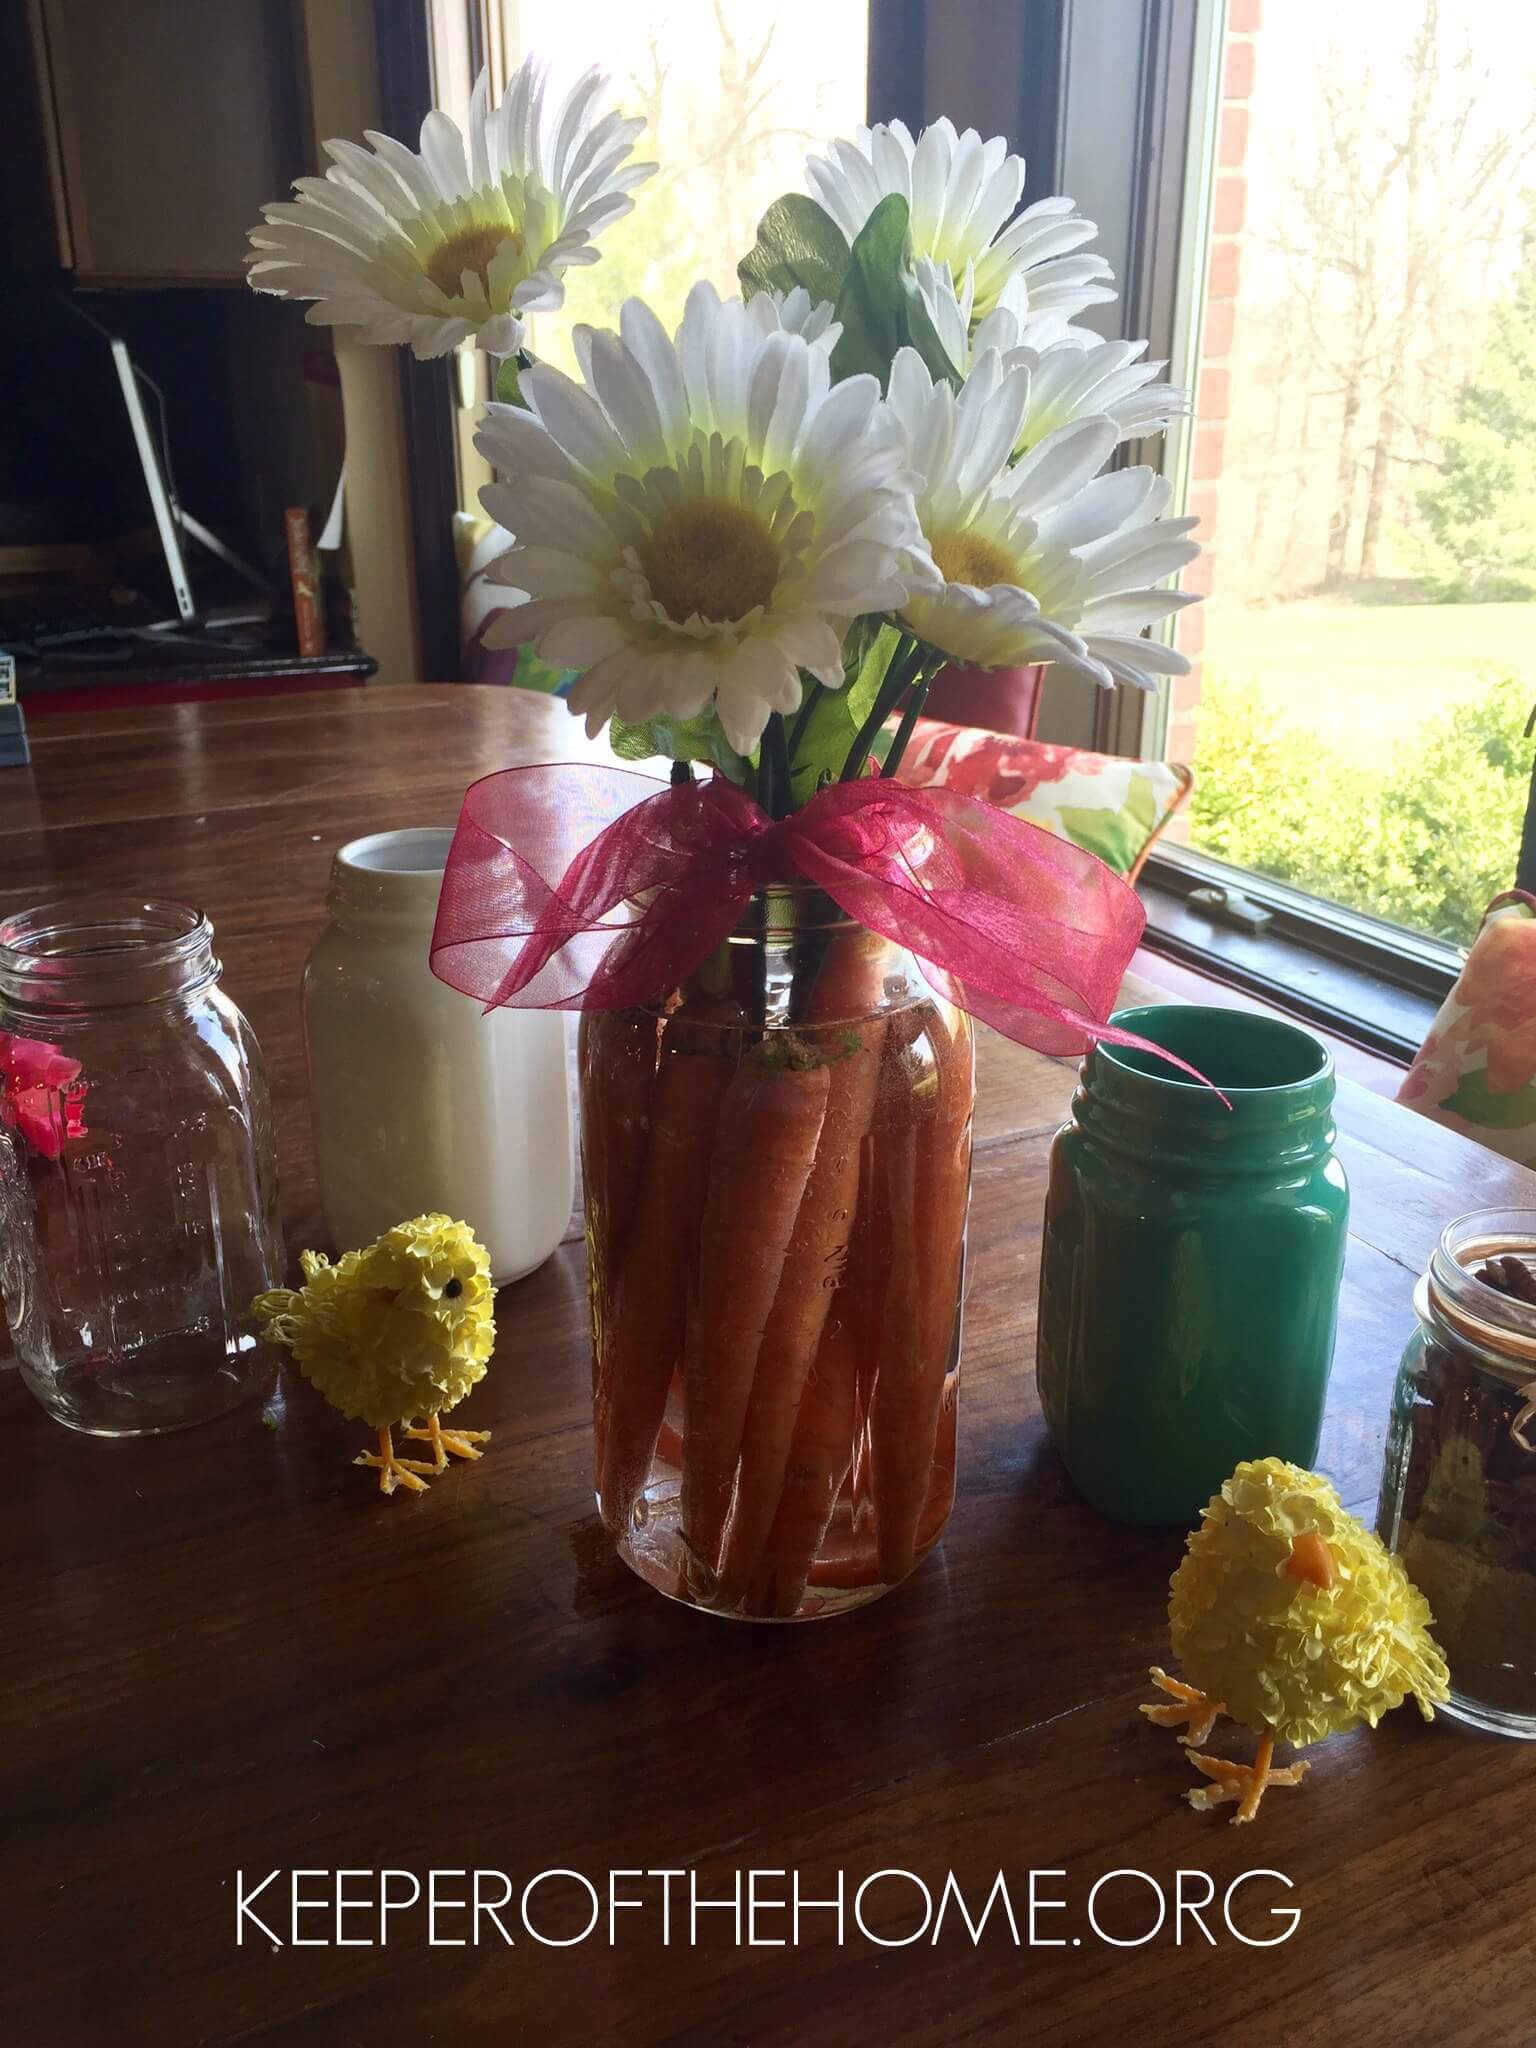 Looking for easy Easter decorations to put together with your kids or at the last minute? If you are anything like me, you have a few (dozen!) mason jars around the house. Let's put them to use!